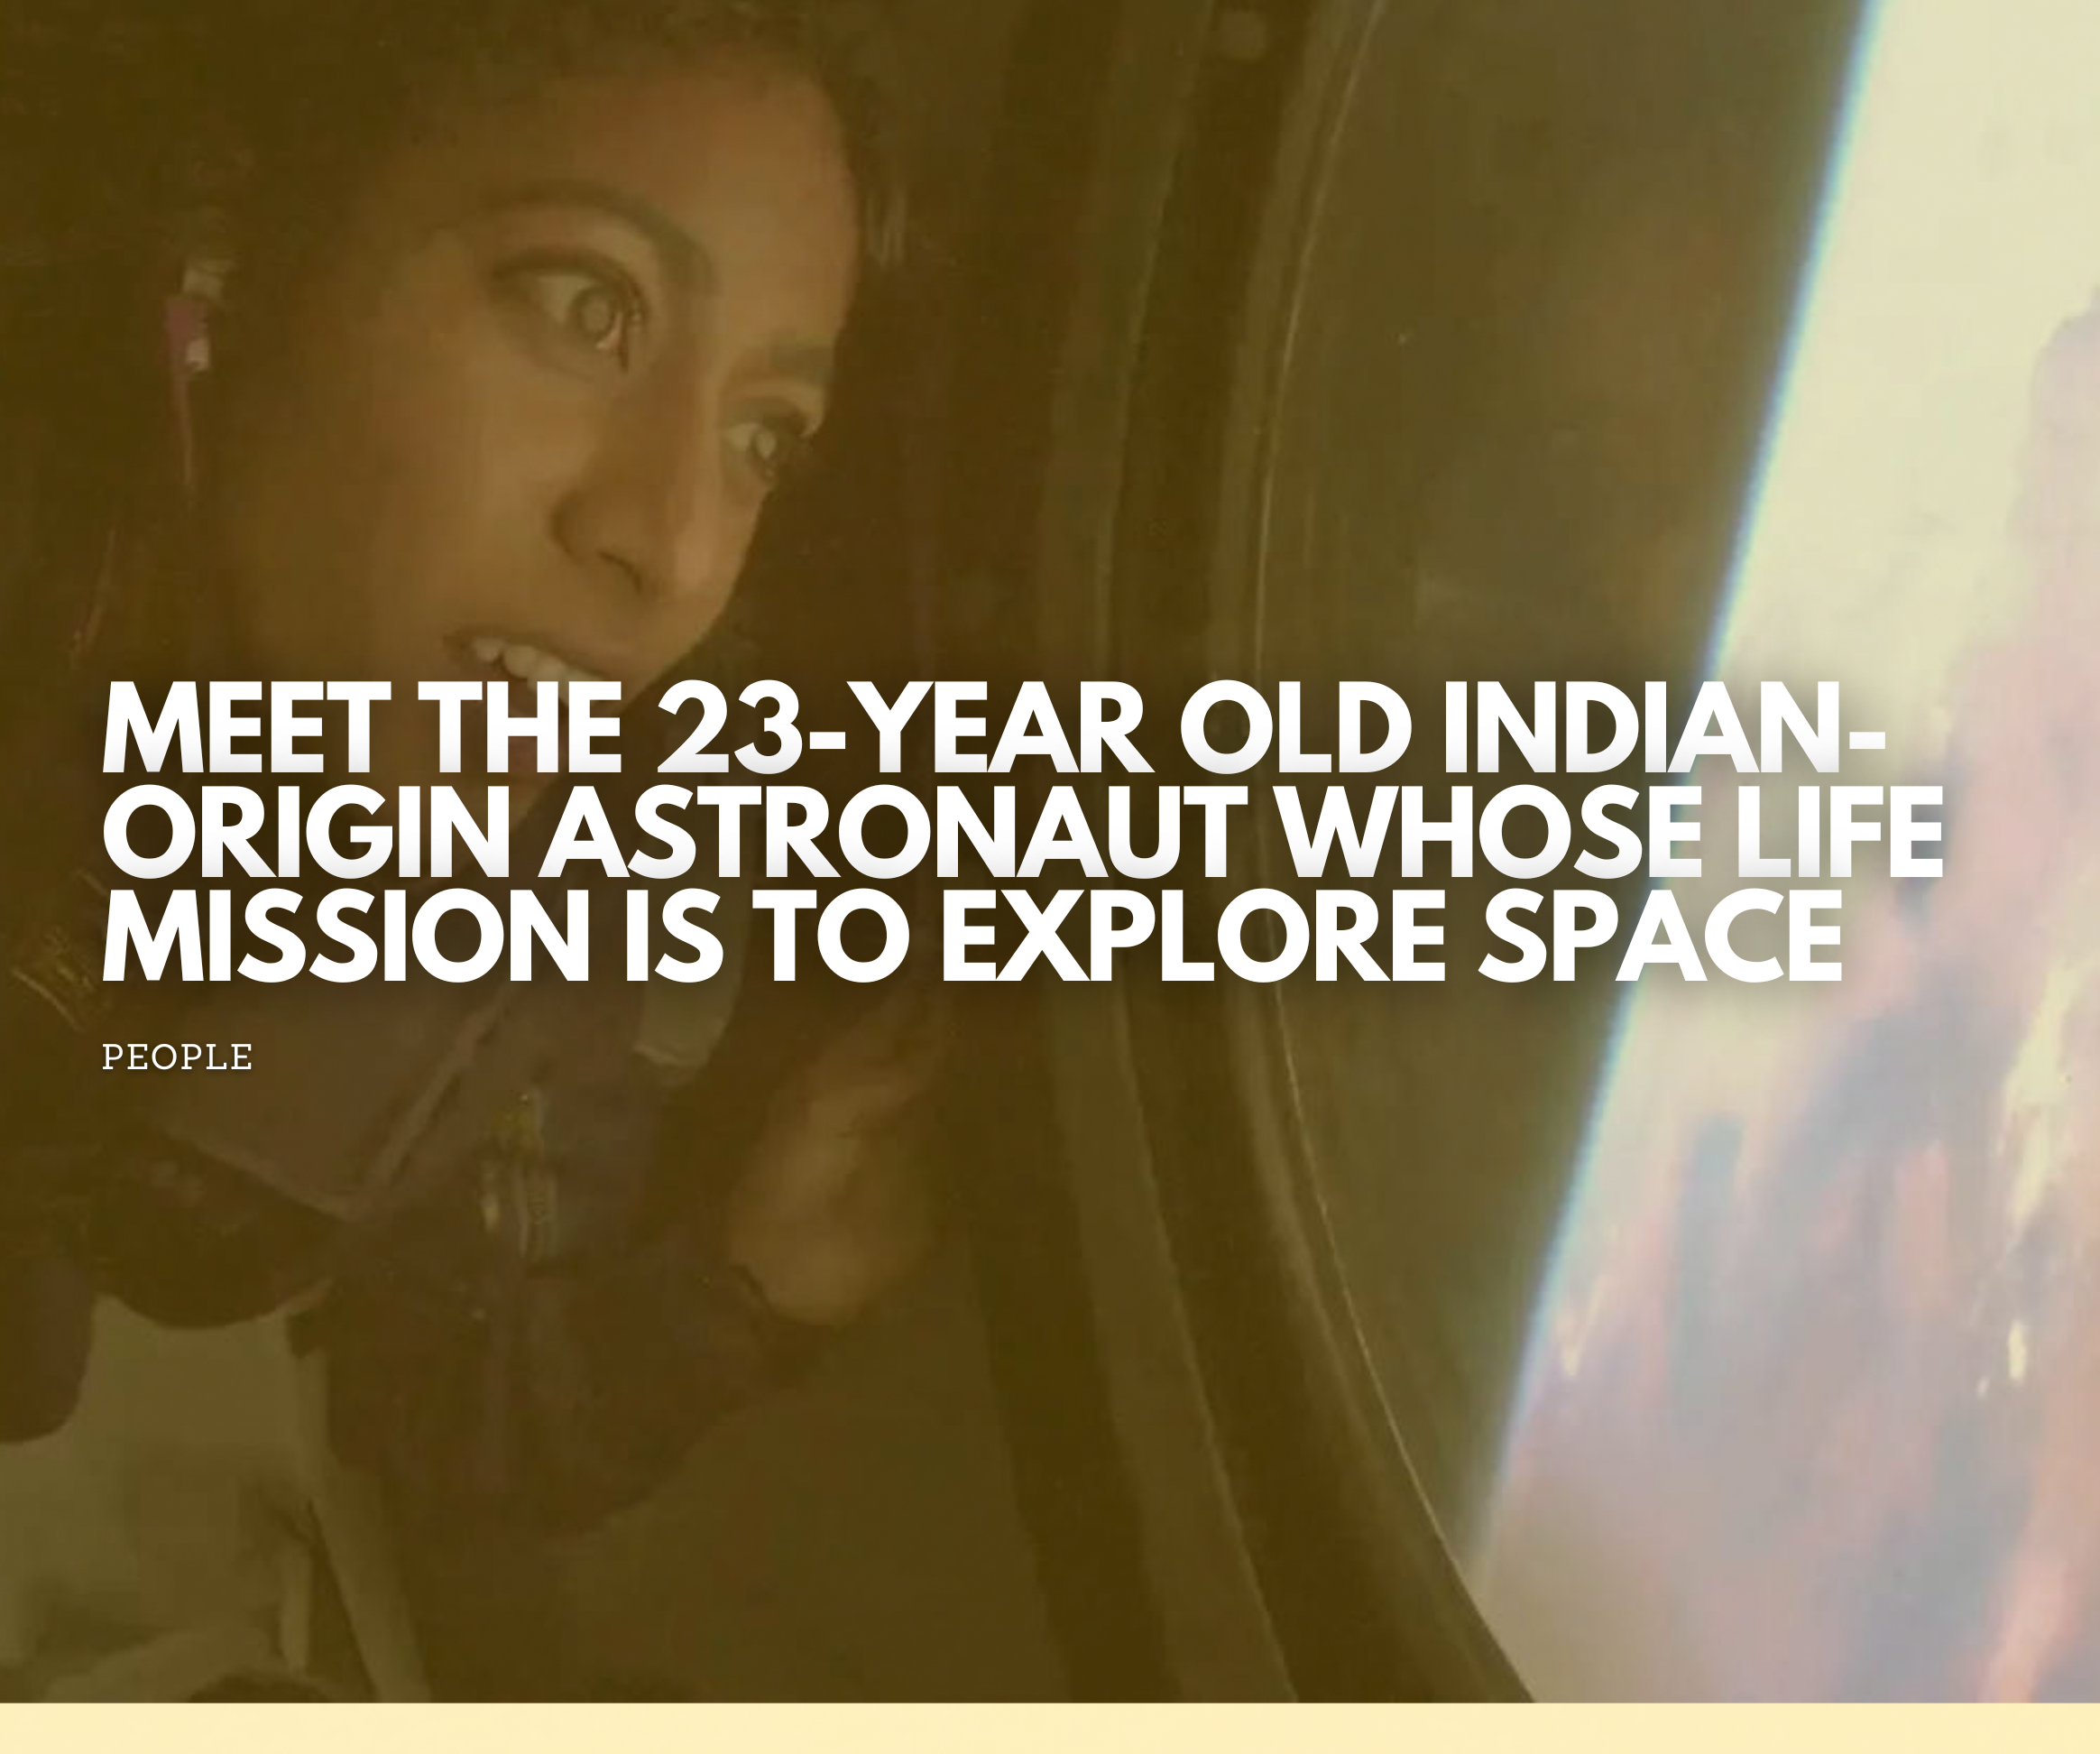 Meet The 23-Year-Old Indian-Origin Astronaut Whose Life Mission Is to explore space quick-fire stories of life space.